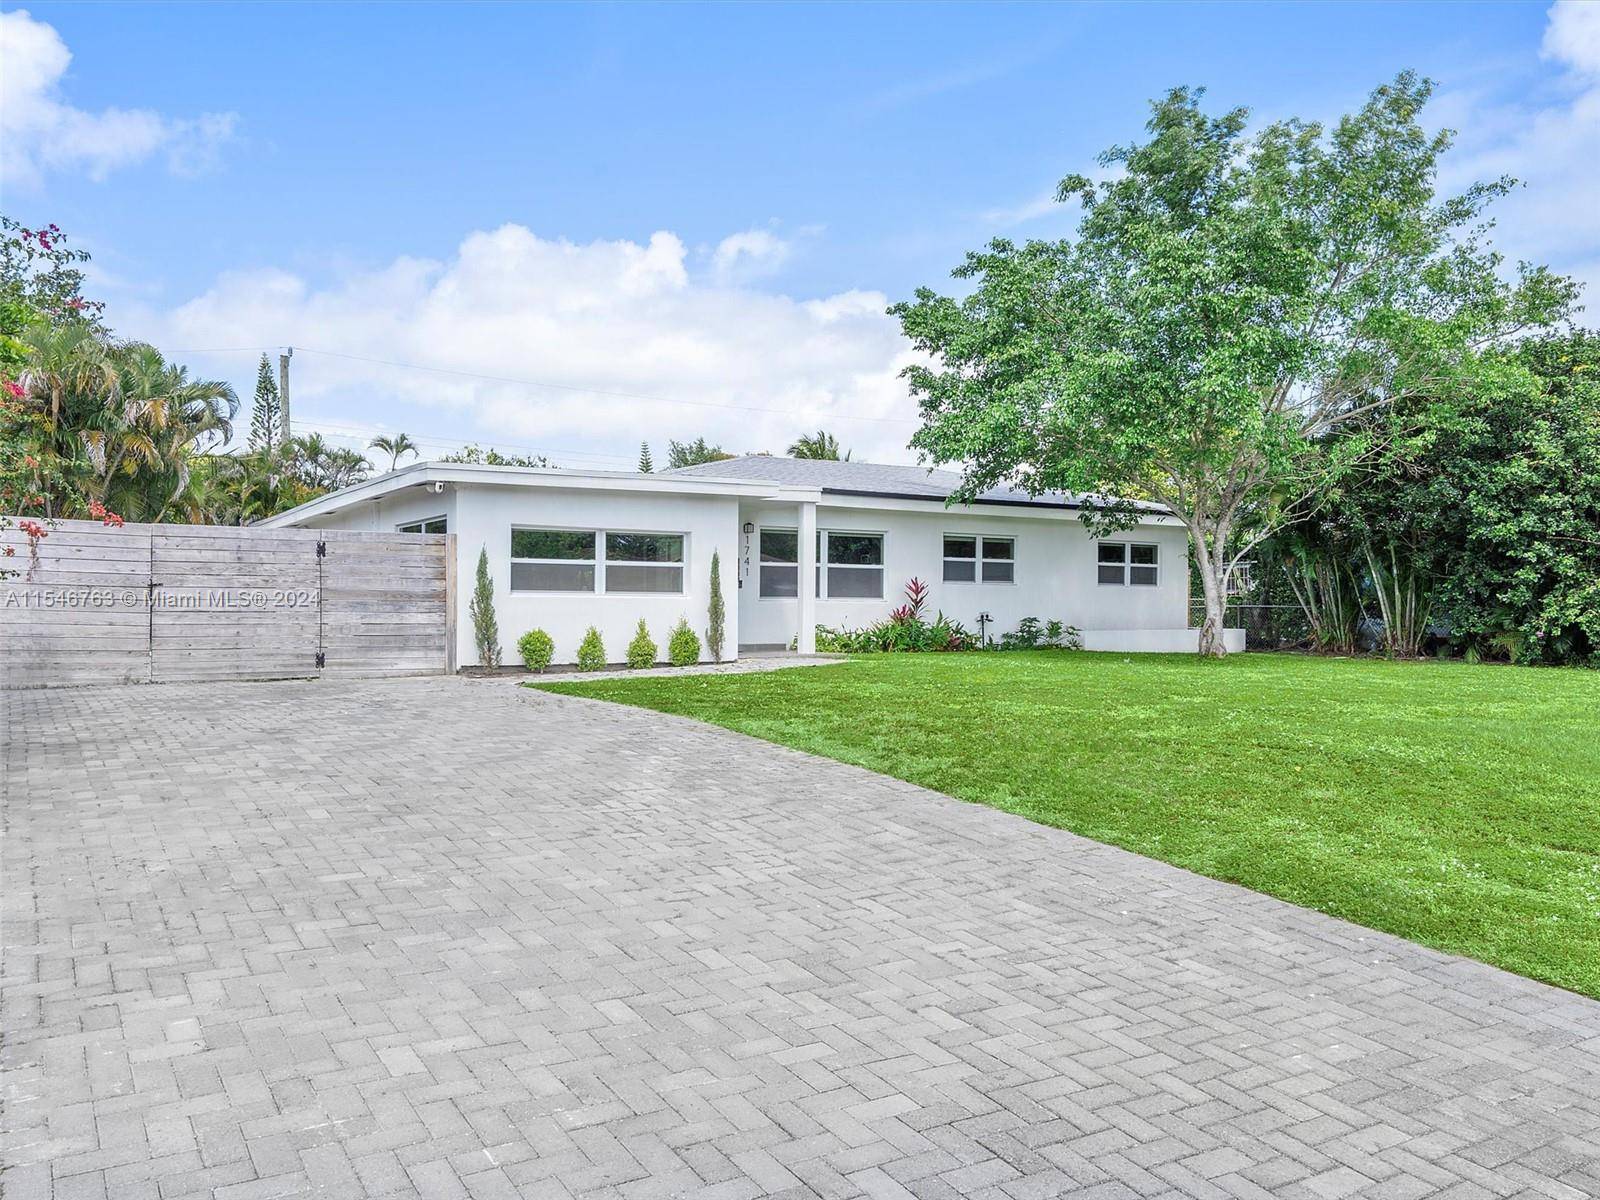 Welcome to this beautifully renovated North Miami Beach 3 bedroom, 2 bathroom home.